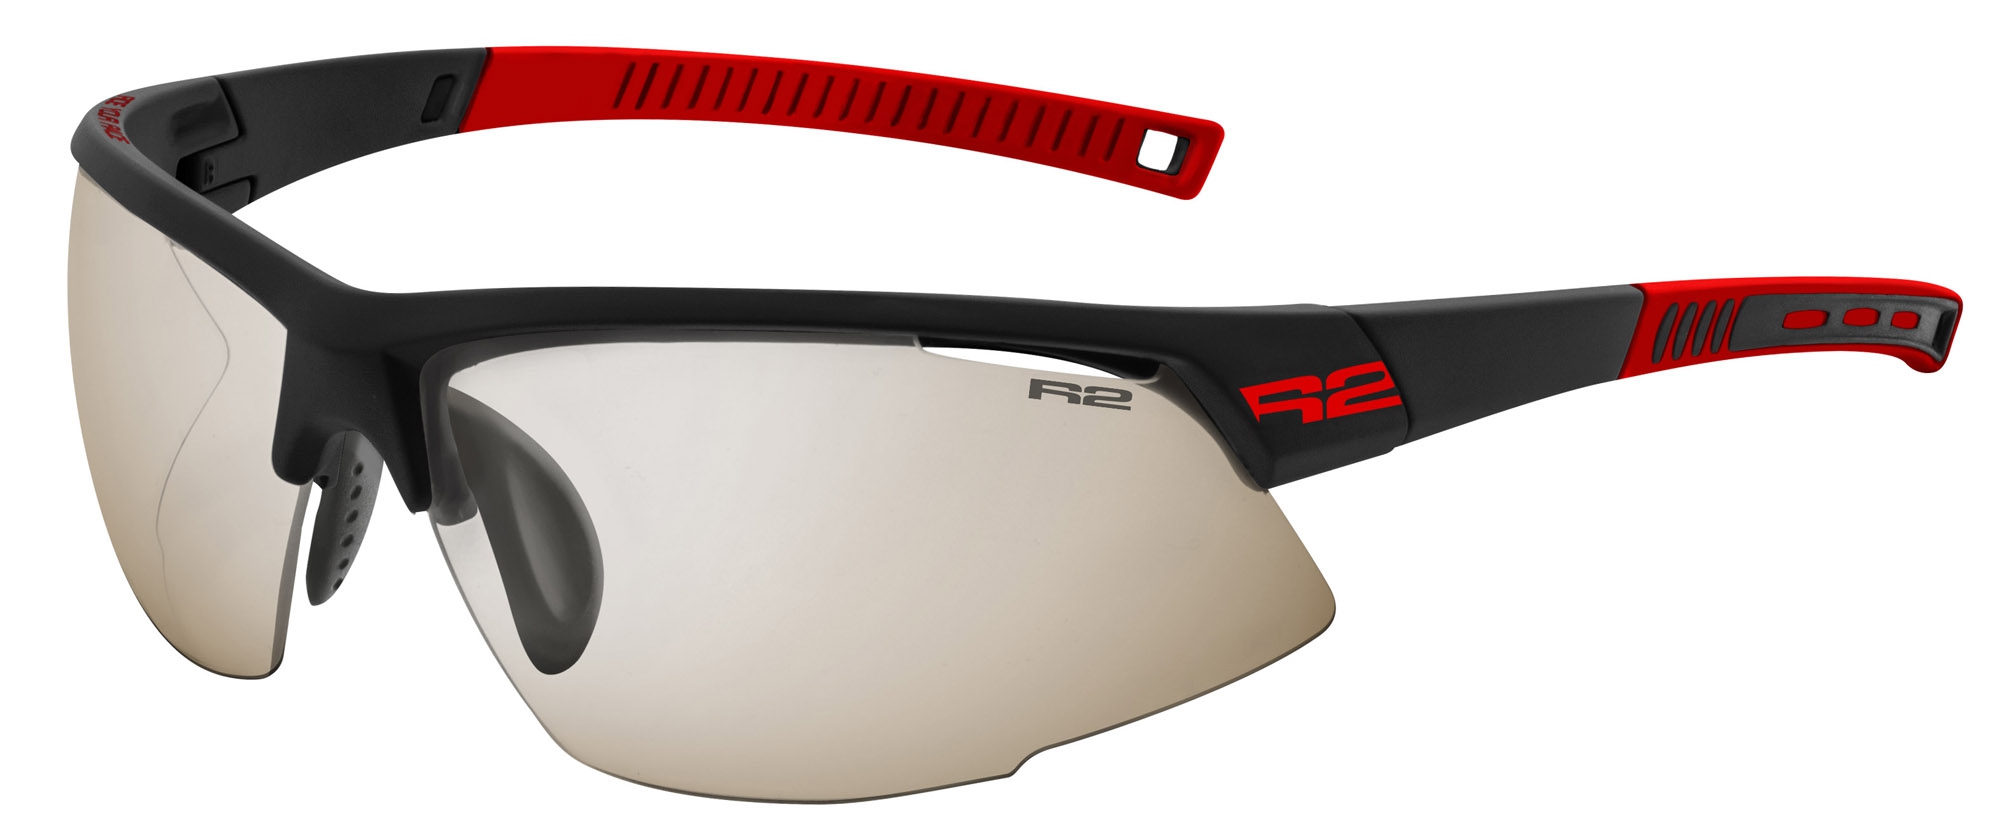 Photochromatic sunglasses  R2 RACER AT063W standard